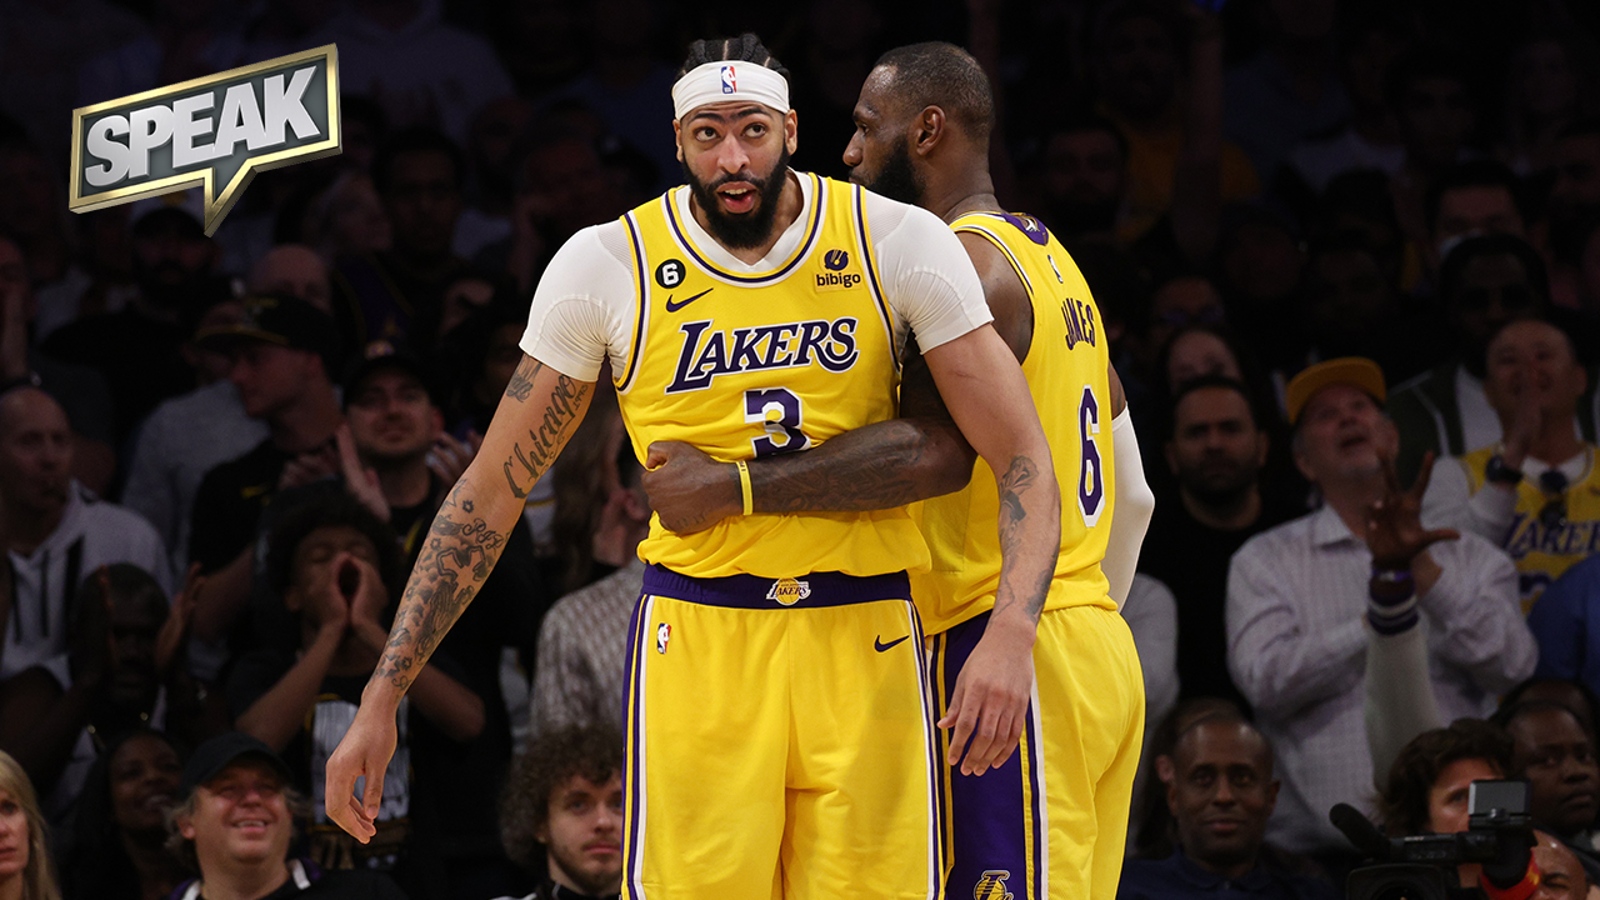 LeBron, Lakers advance to WCF, who deserves the most credit for their success?